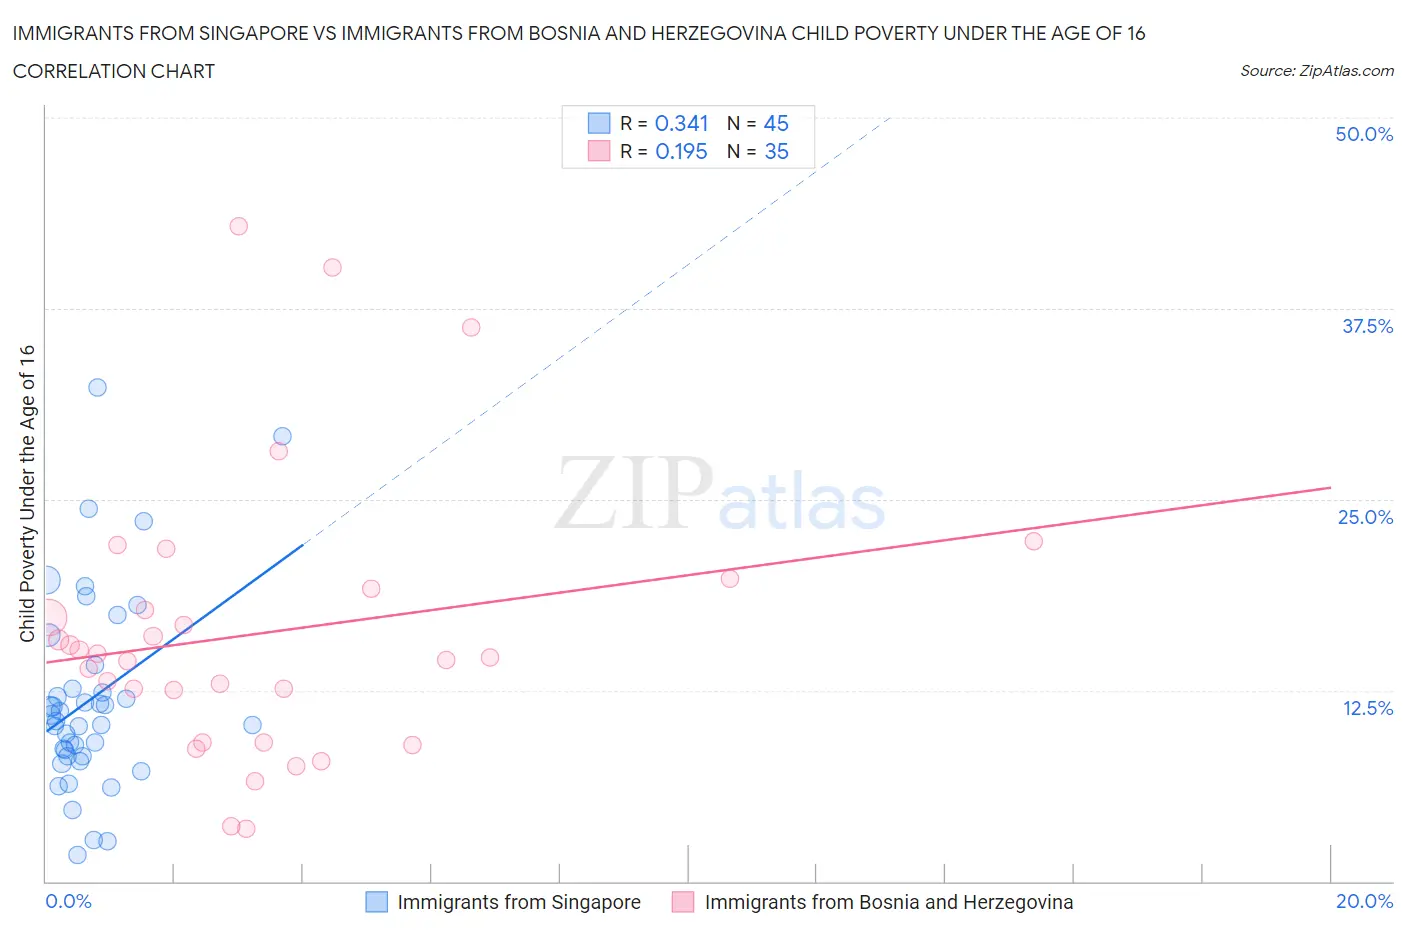 Immigrants from Singapore vs Immigrants from Bosnia and Herzegovina Child Poverty Under the Age of 16